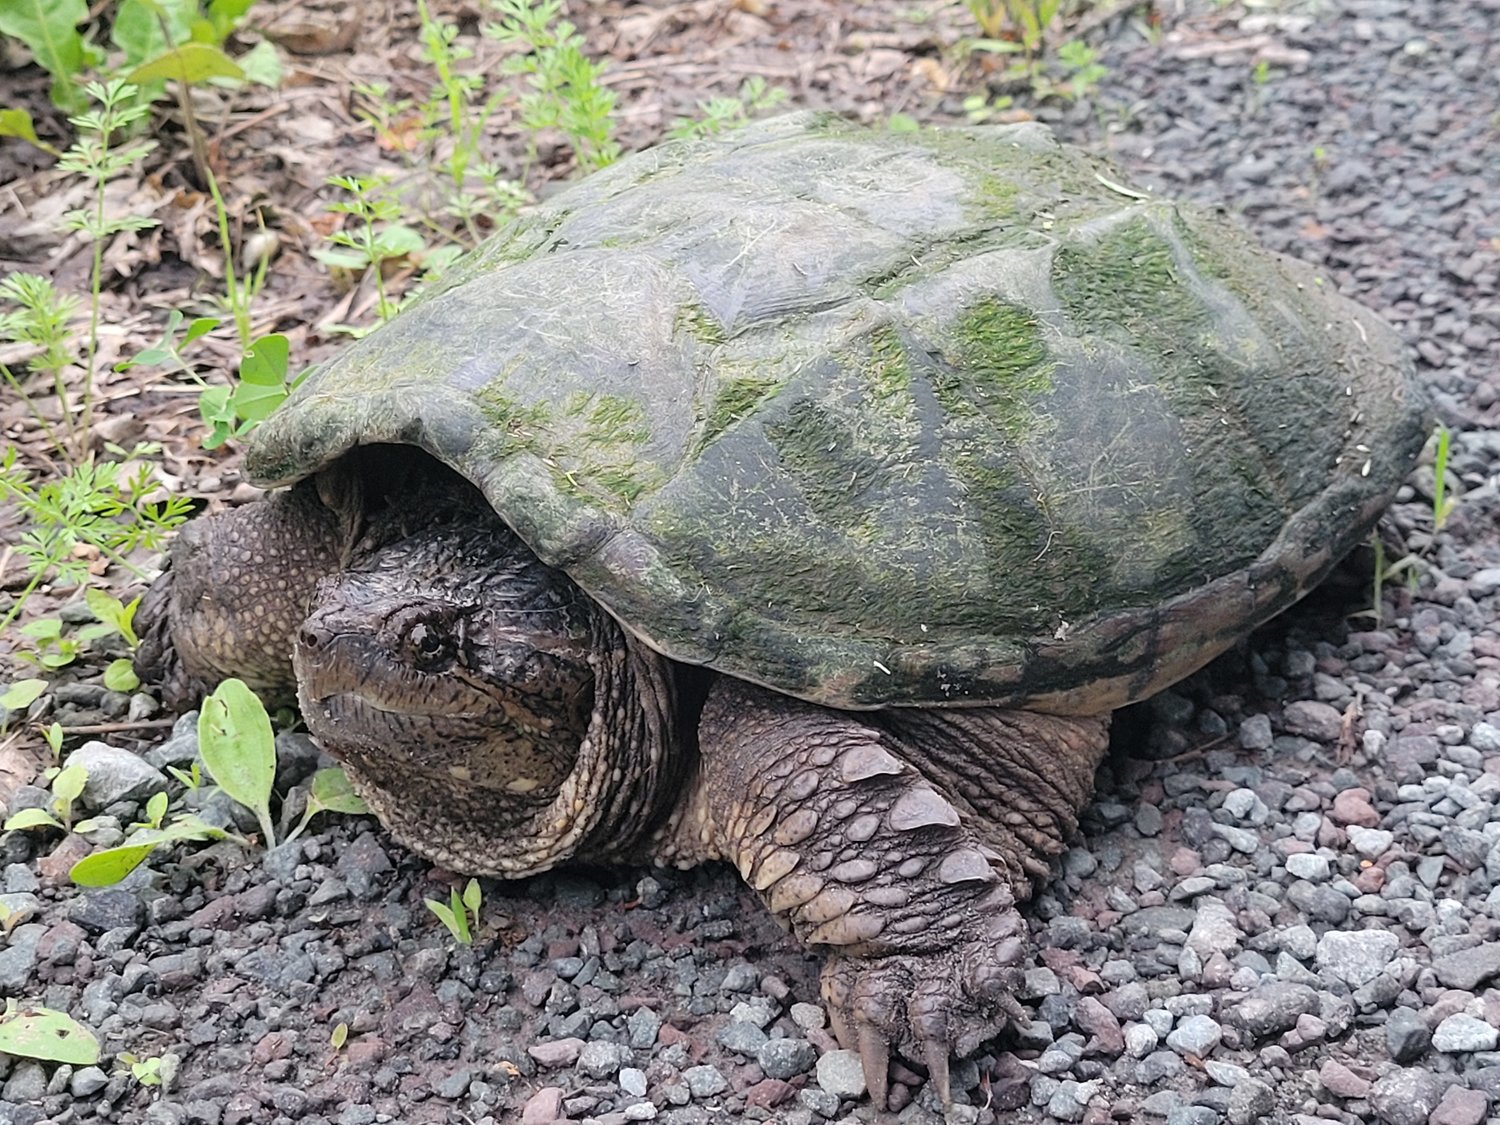 A snapping turtle I found this week reminds me of the need to stay the course...